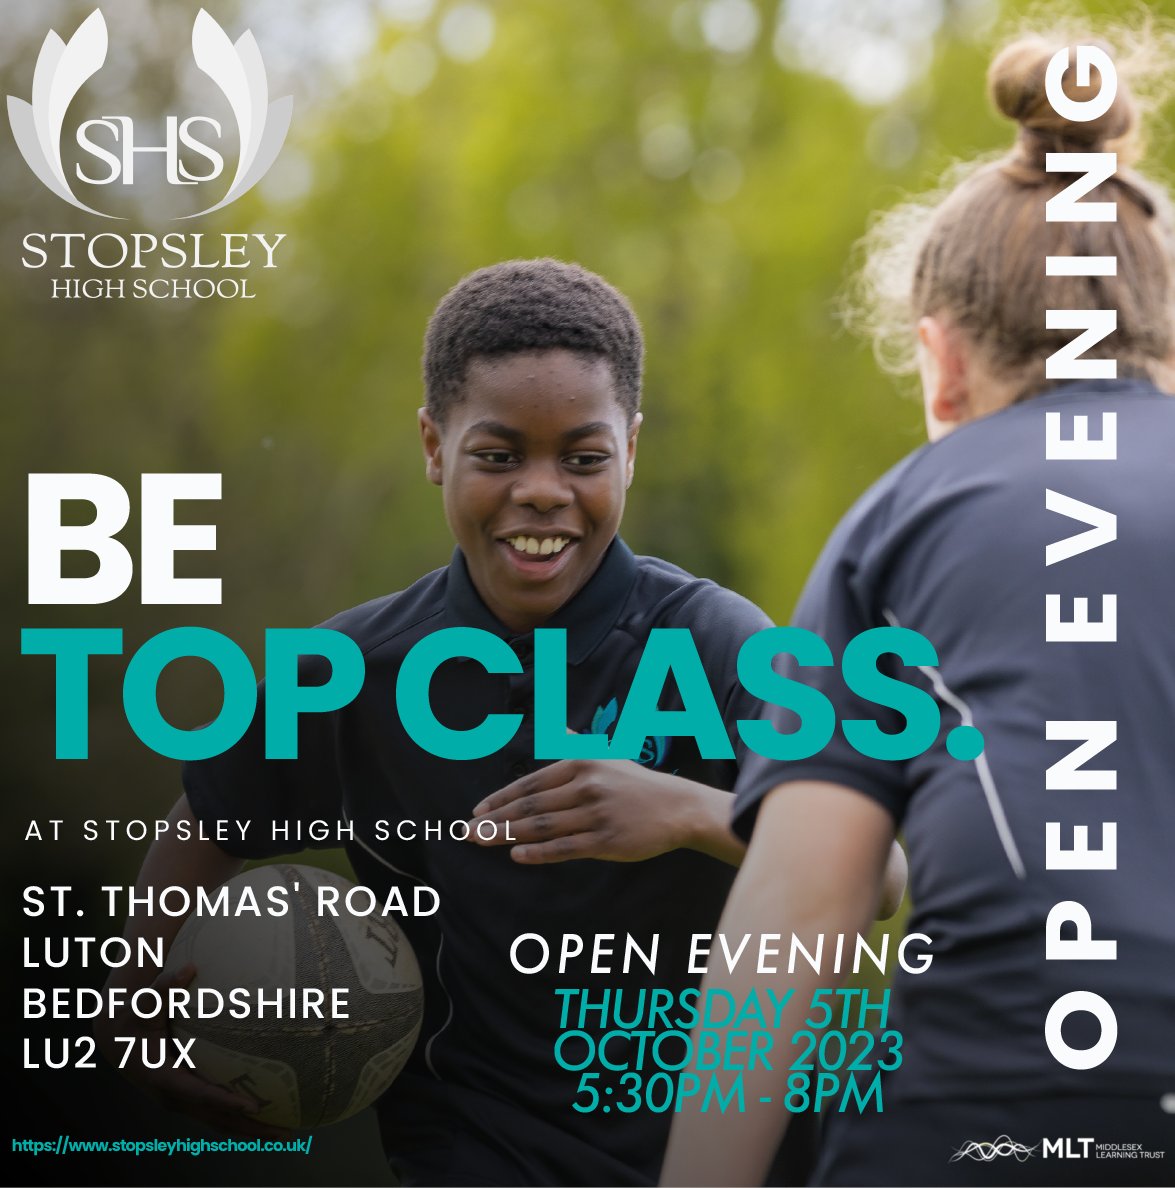 Be Top Class at Stopsley High School and join us on Thursday 5th October 2023 5:30 PM-8 PM for our Open Evening for Year 6 Parents.Follow the link to book a place! buff.ly/3LufqtM @StopsleyPrimary @RamridgePrimary @BushmeadLuton @StMatthewsLuton